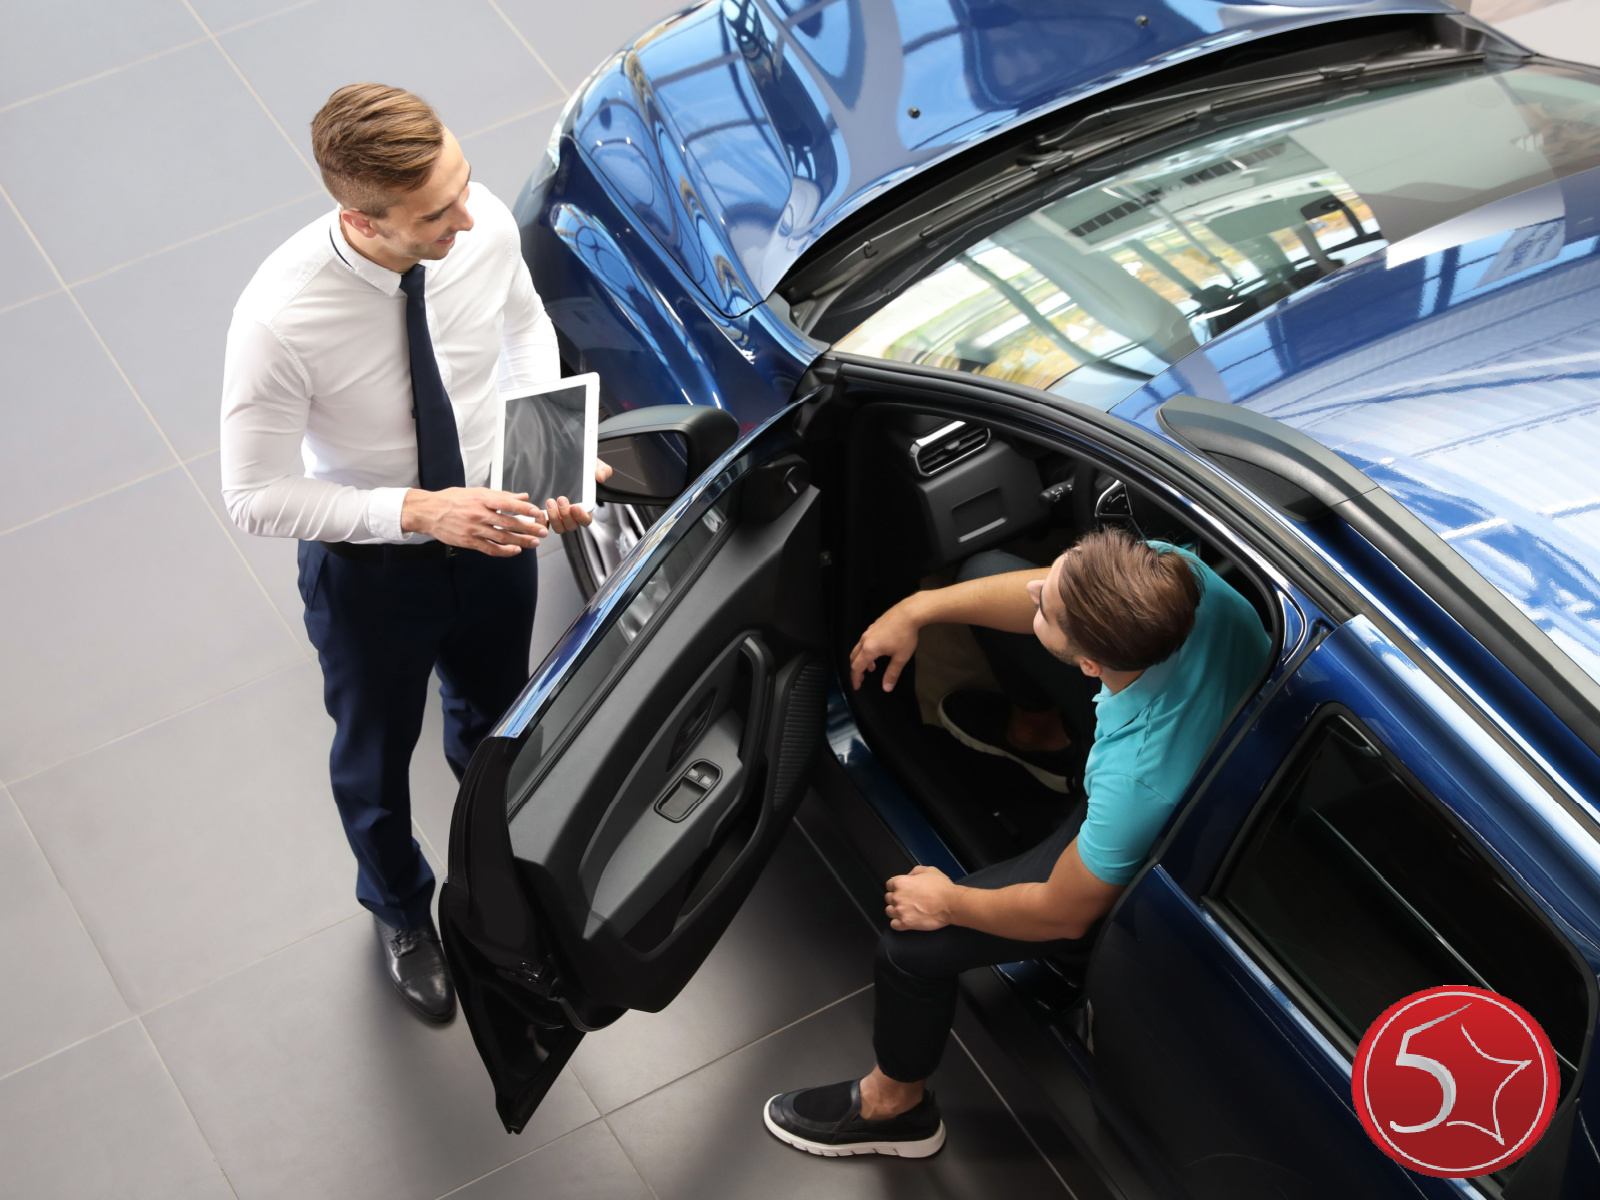 Get Your Next Vehicle with Hassle-Free Auto Financing